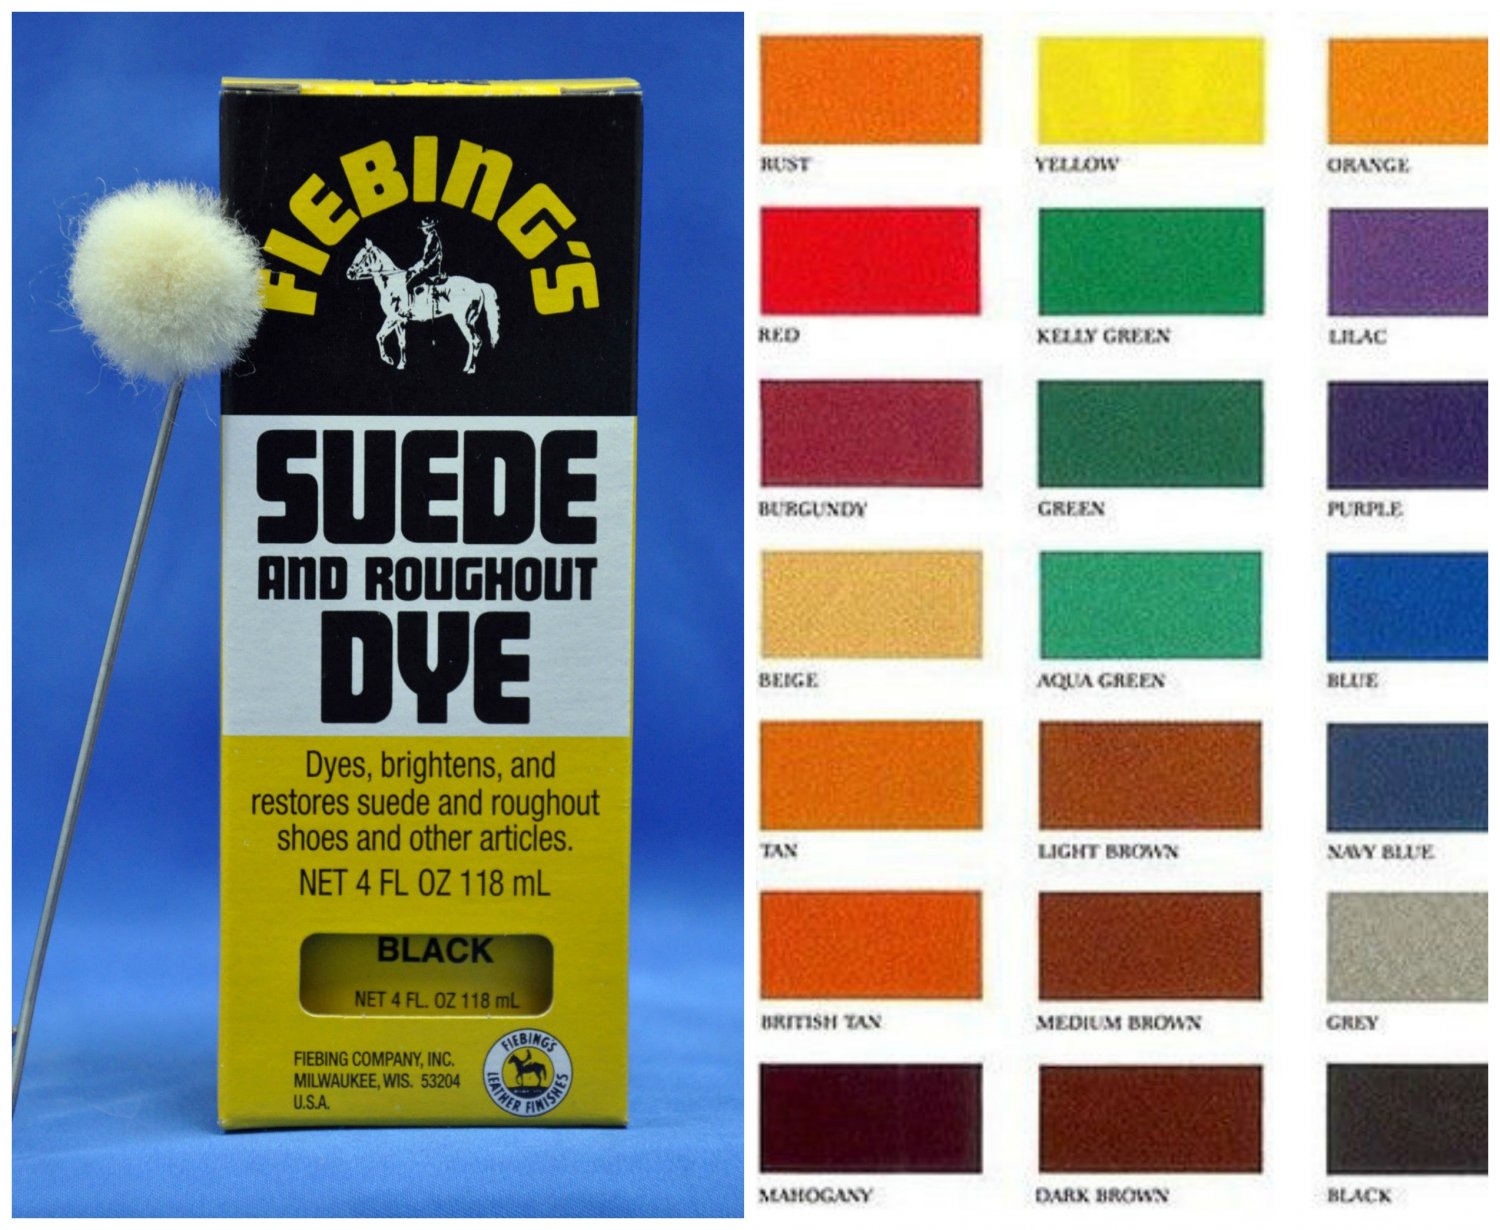 Black Suede Dye - best suede shoe dye for suede shoes and boots